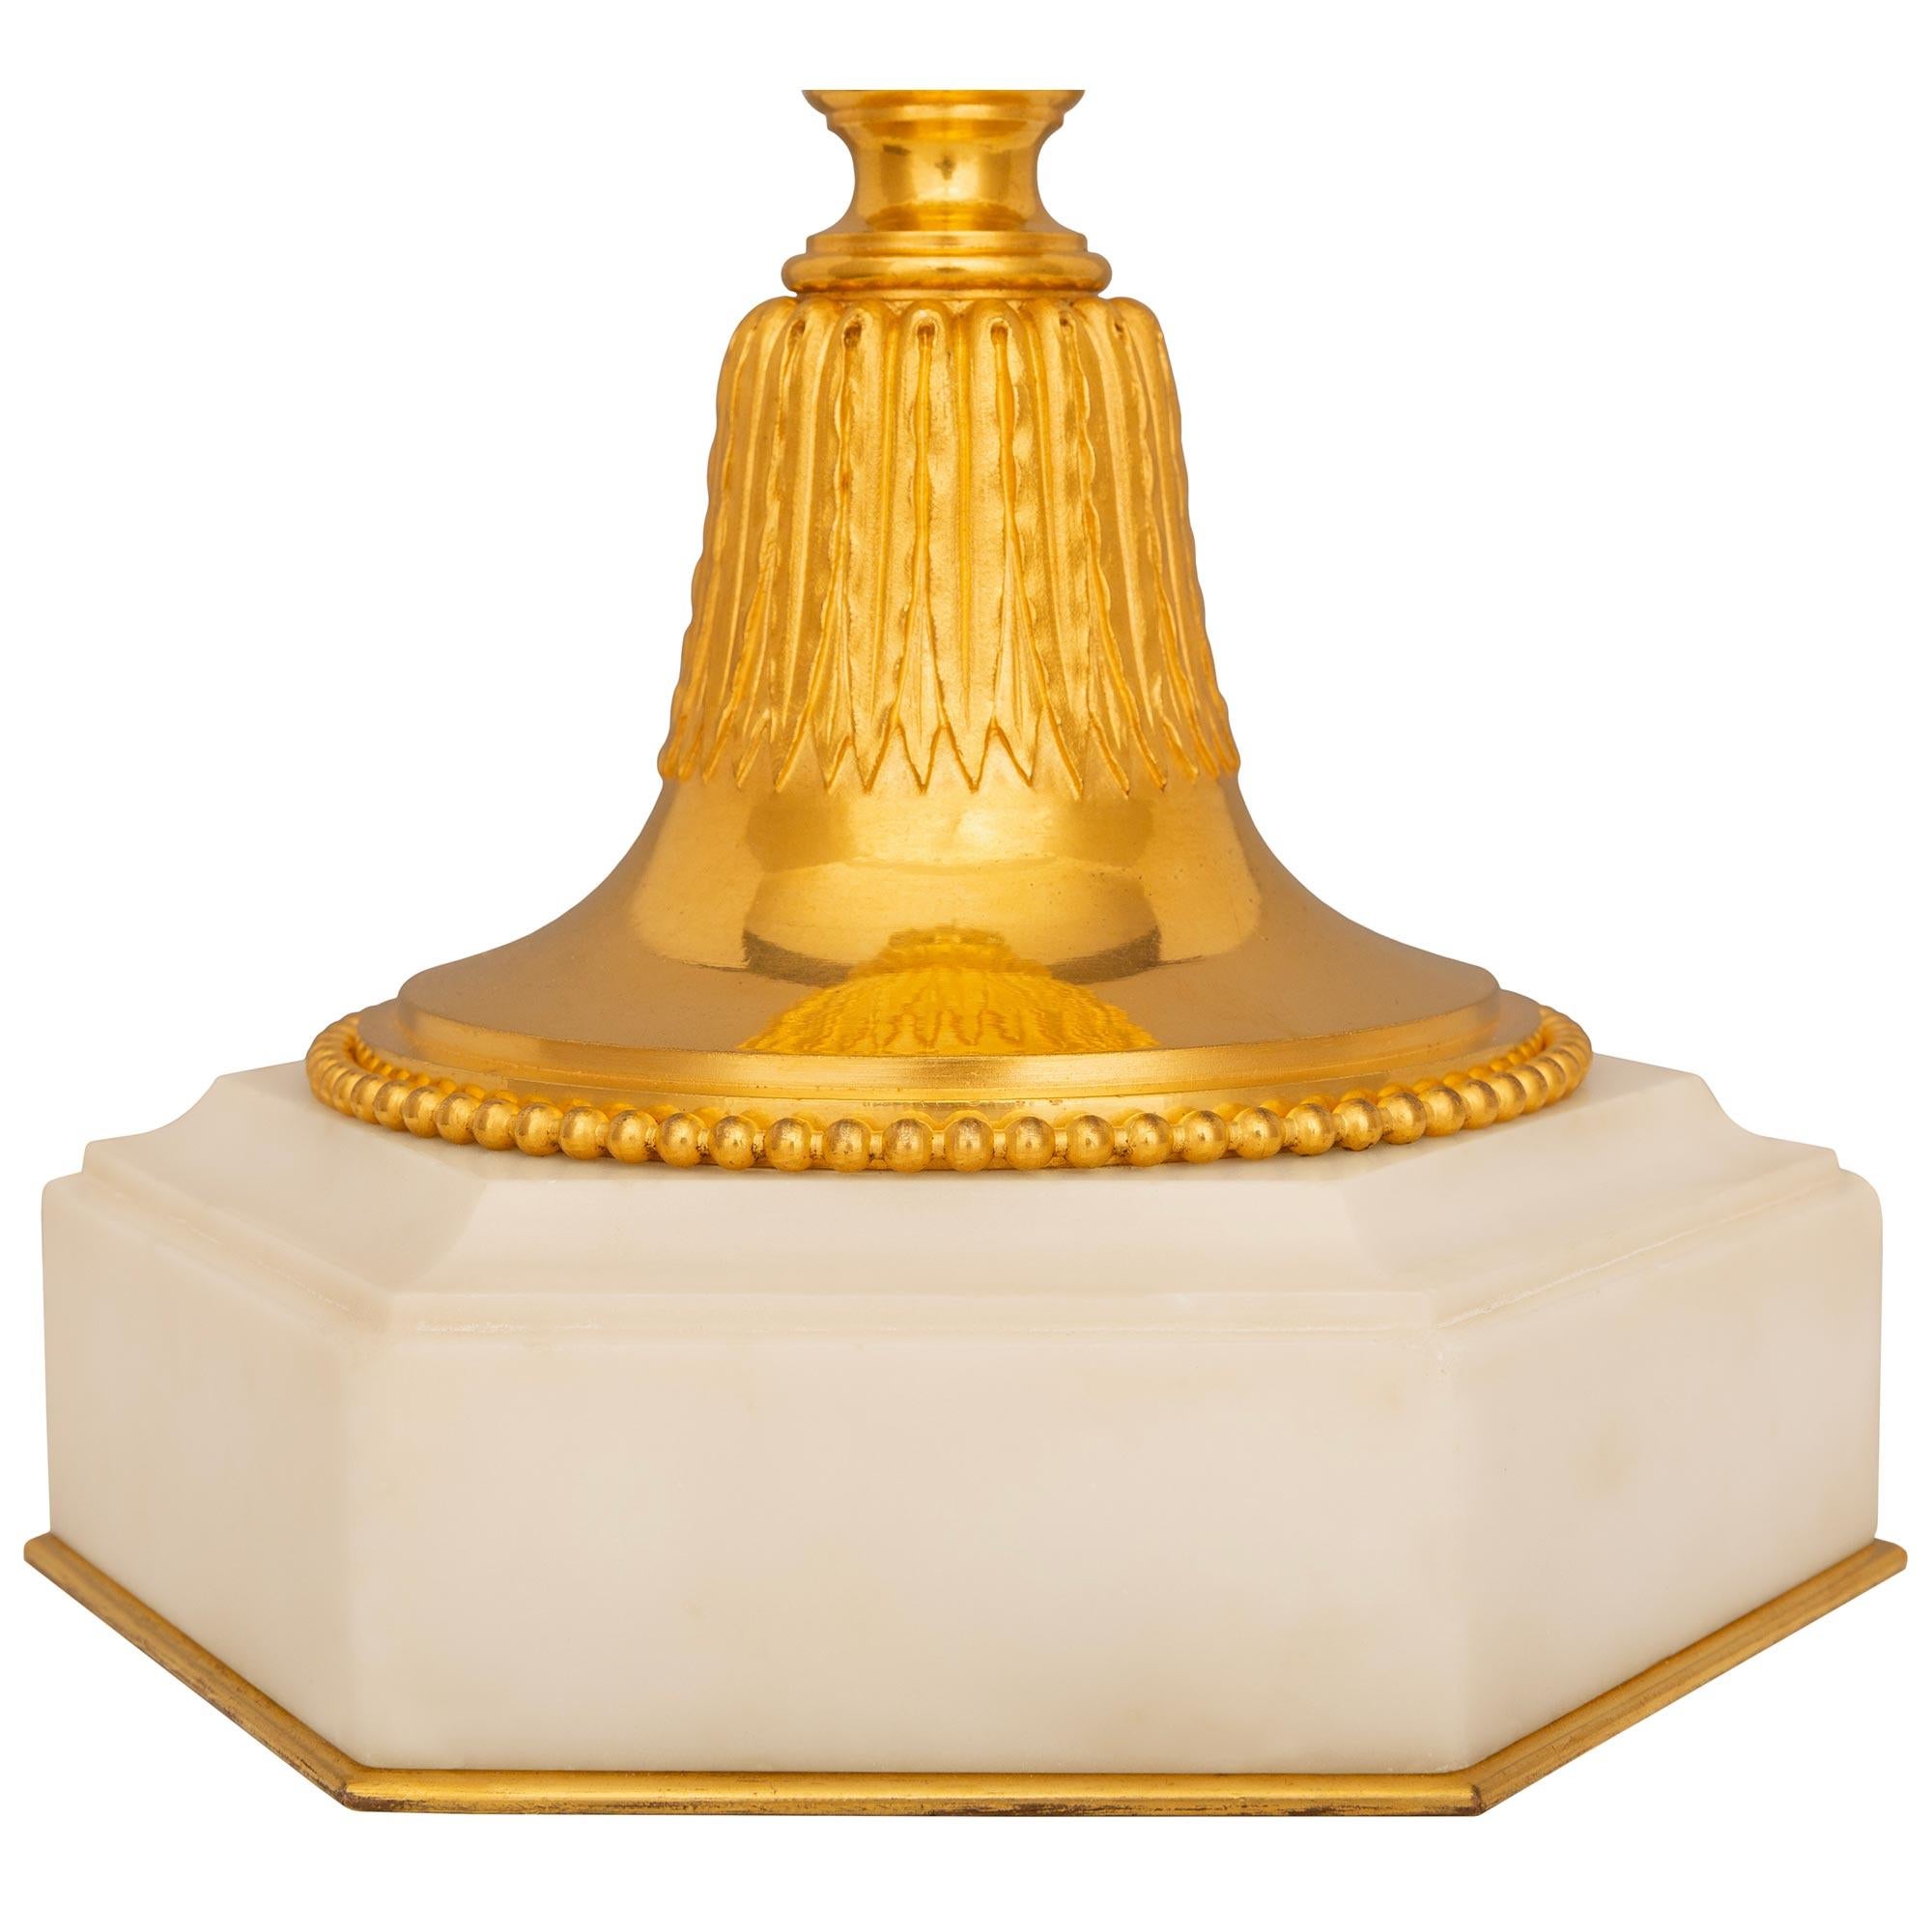 French 19th Century Louis XVI St. Wedgwood Porcelain & Ormolu Athénienne Lamp For Sale 7